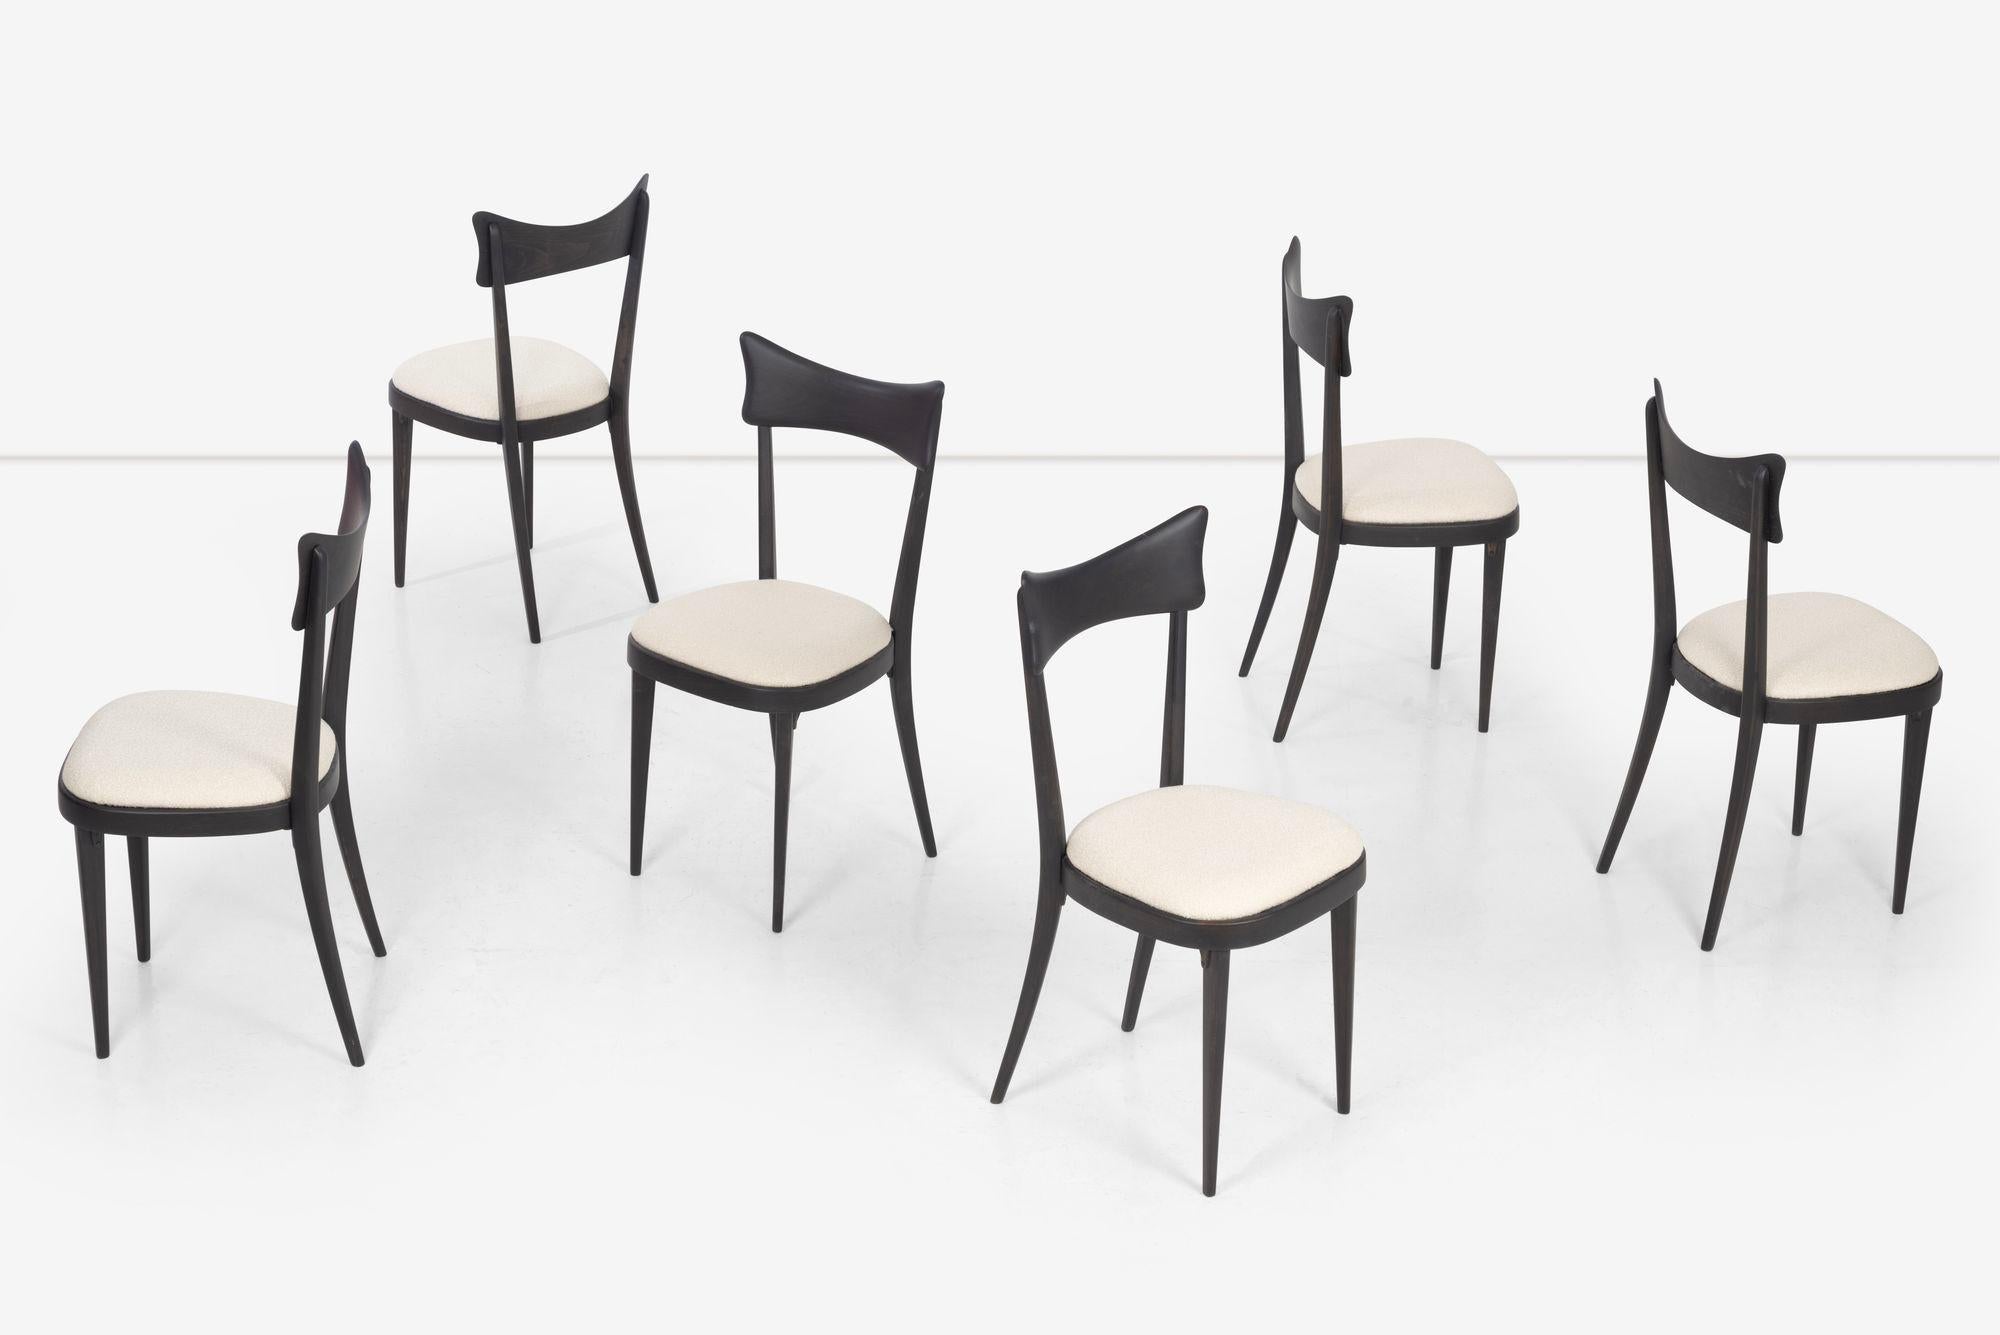 Fratelli Mariani Di Lacceri set of Six Dining Chairs,
Restored Itailian Walnut frames in black lacquer with matte finish, seats replaced with 
knottier boucle underside label intact and preserved [Fratelli Mariani Di Lacceri Fabbrica]
Seat height